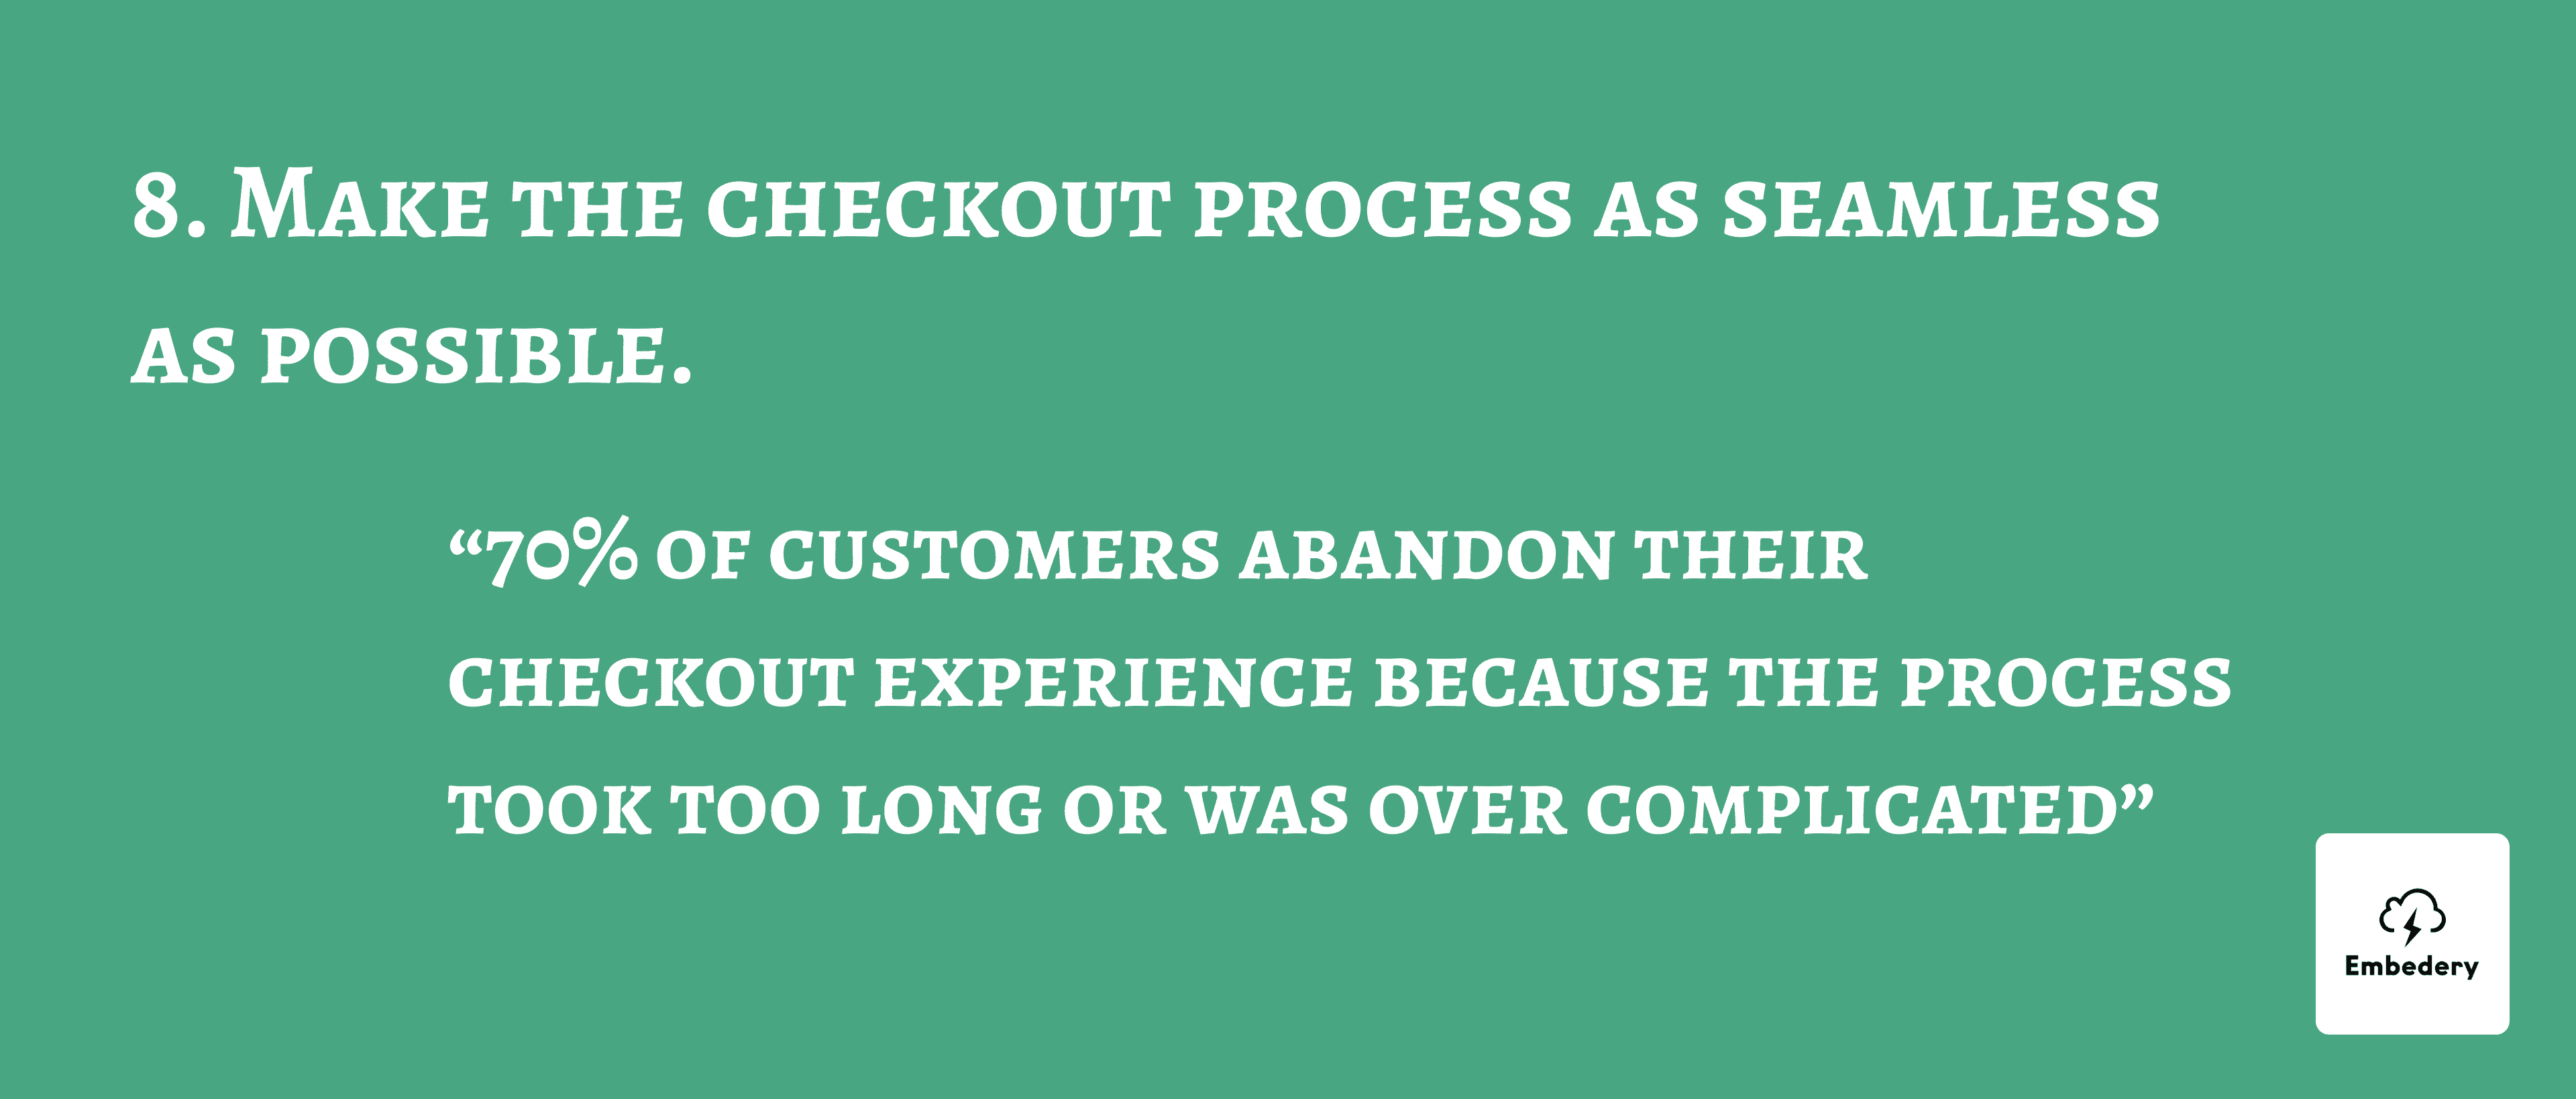 Make the checkout process as seamless as possible